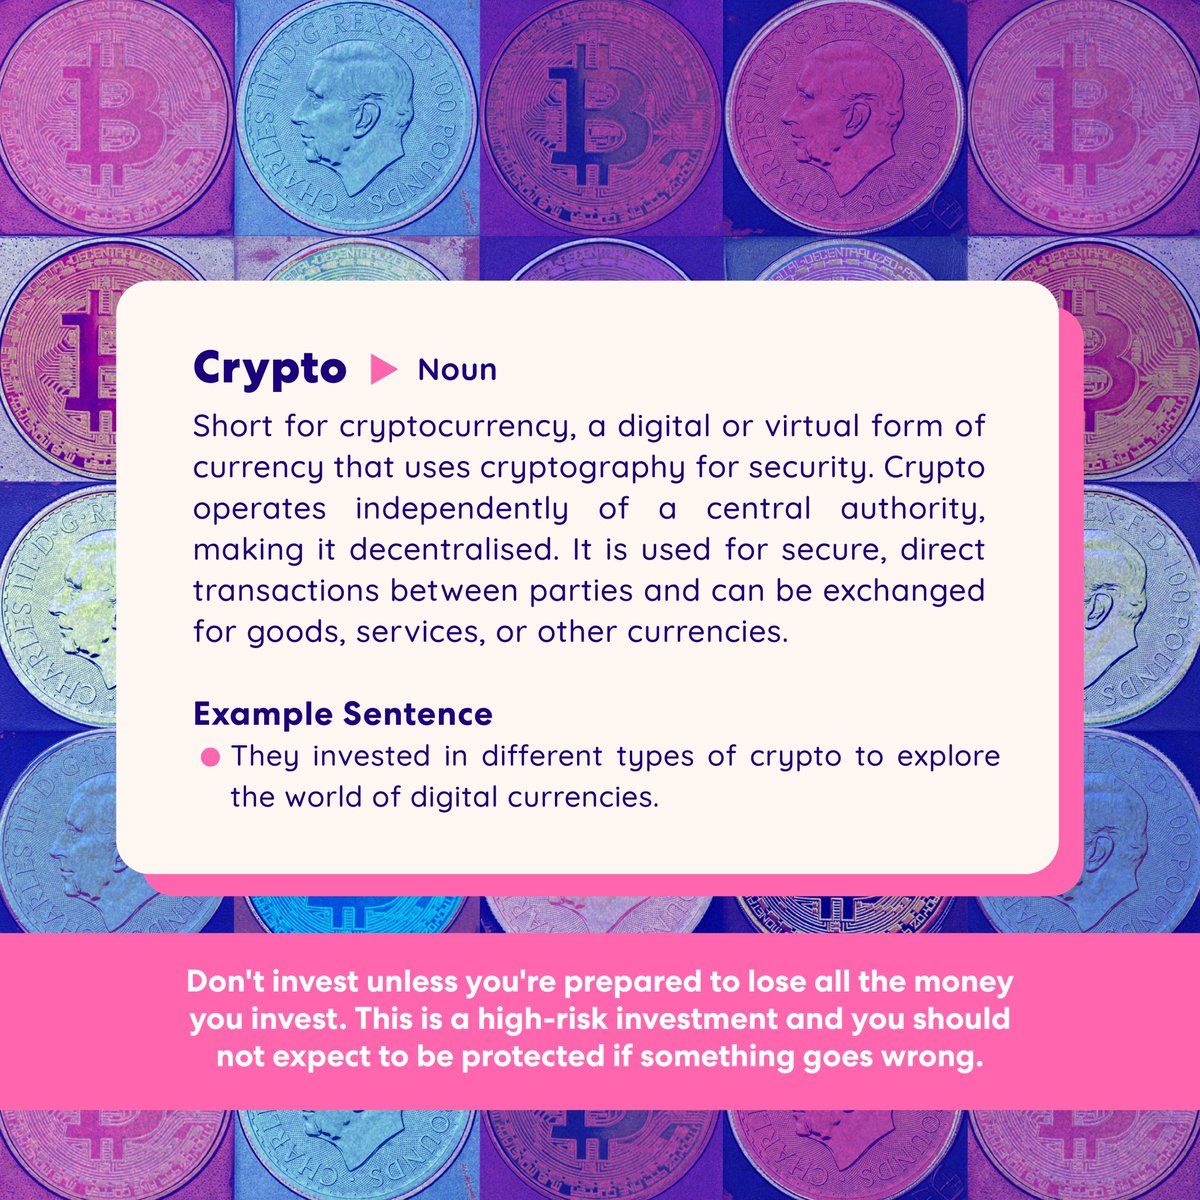 #Cryptocurrency is a digital currency secured by cryptography. It is a digital asset which is distributed on a number of computers. This structure means it is not controlled by one government/ entity. Don't invest unless you're prepared to lose all the money you invest. #Crypto